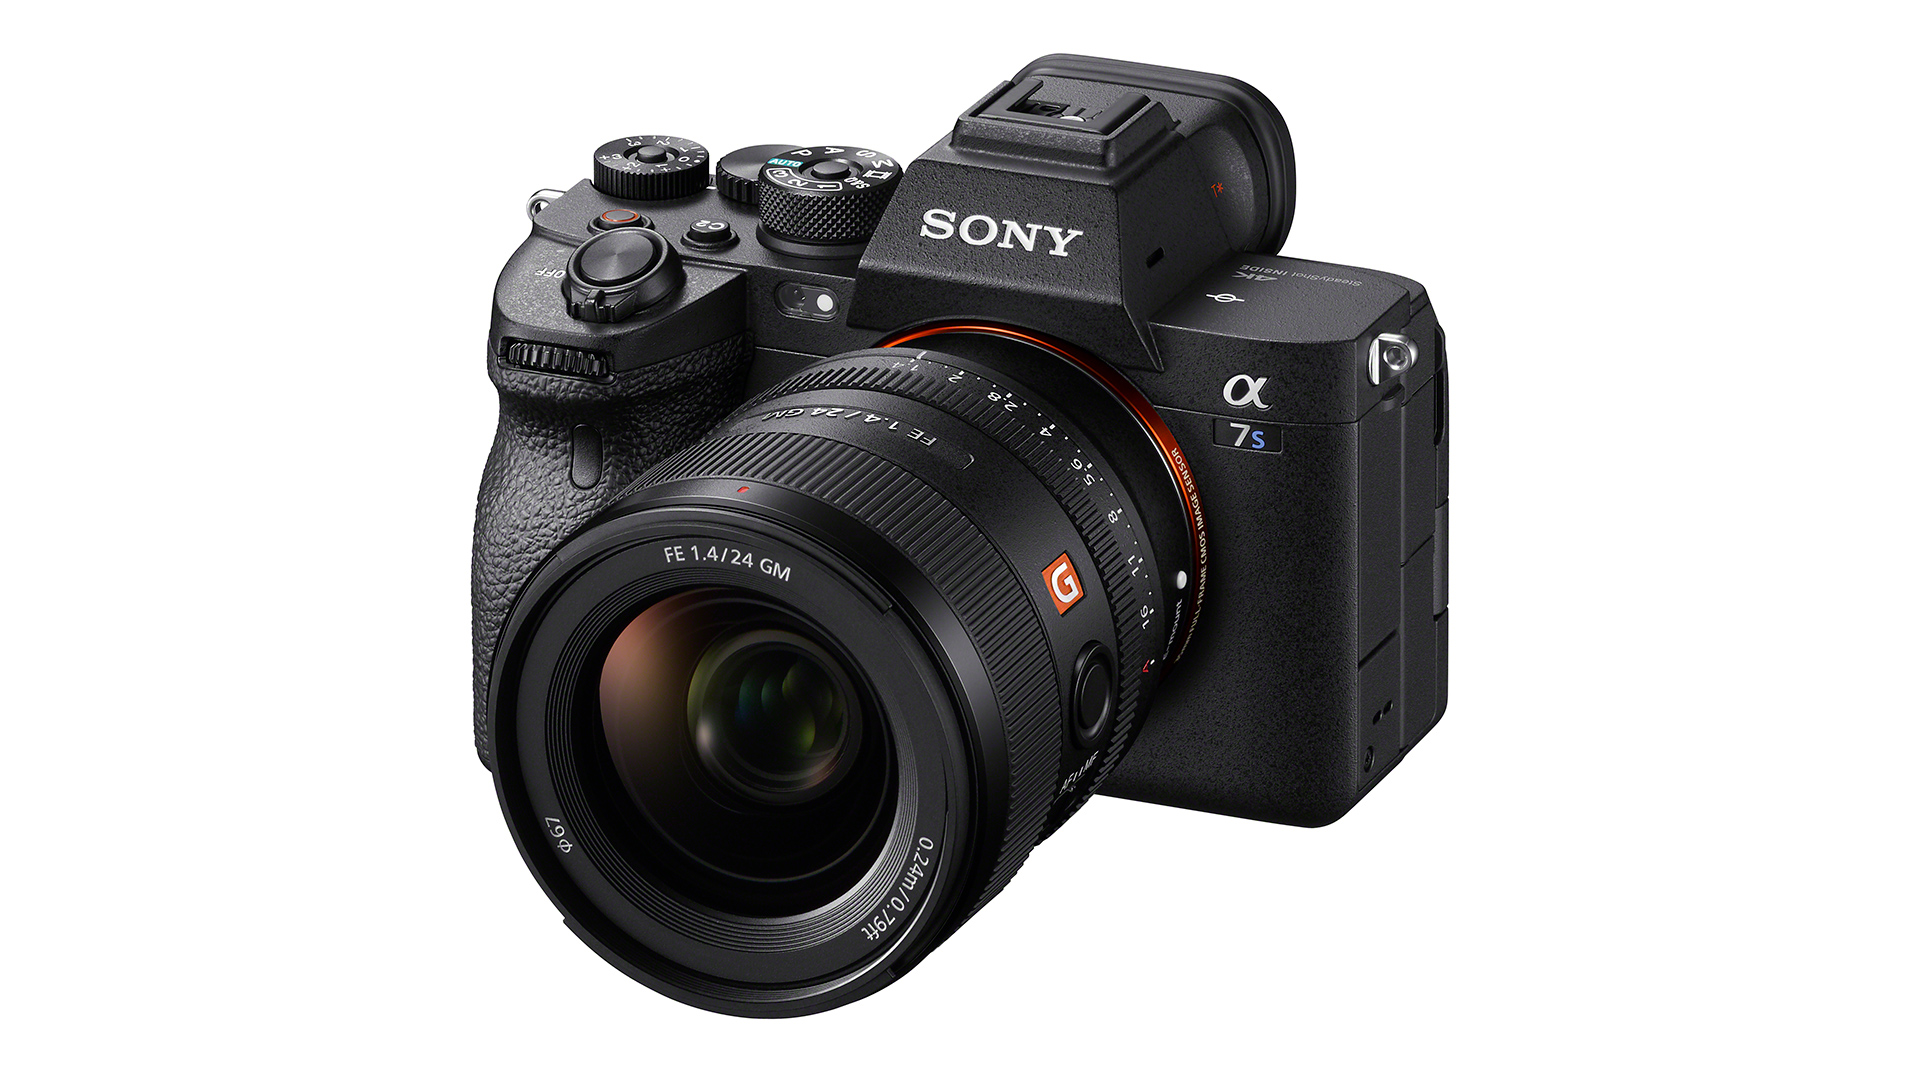 The Sony A7sIII (α7sIII) has been announced. Image: Sony.